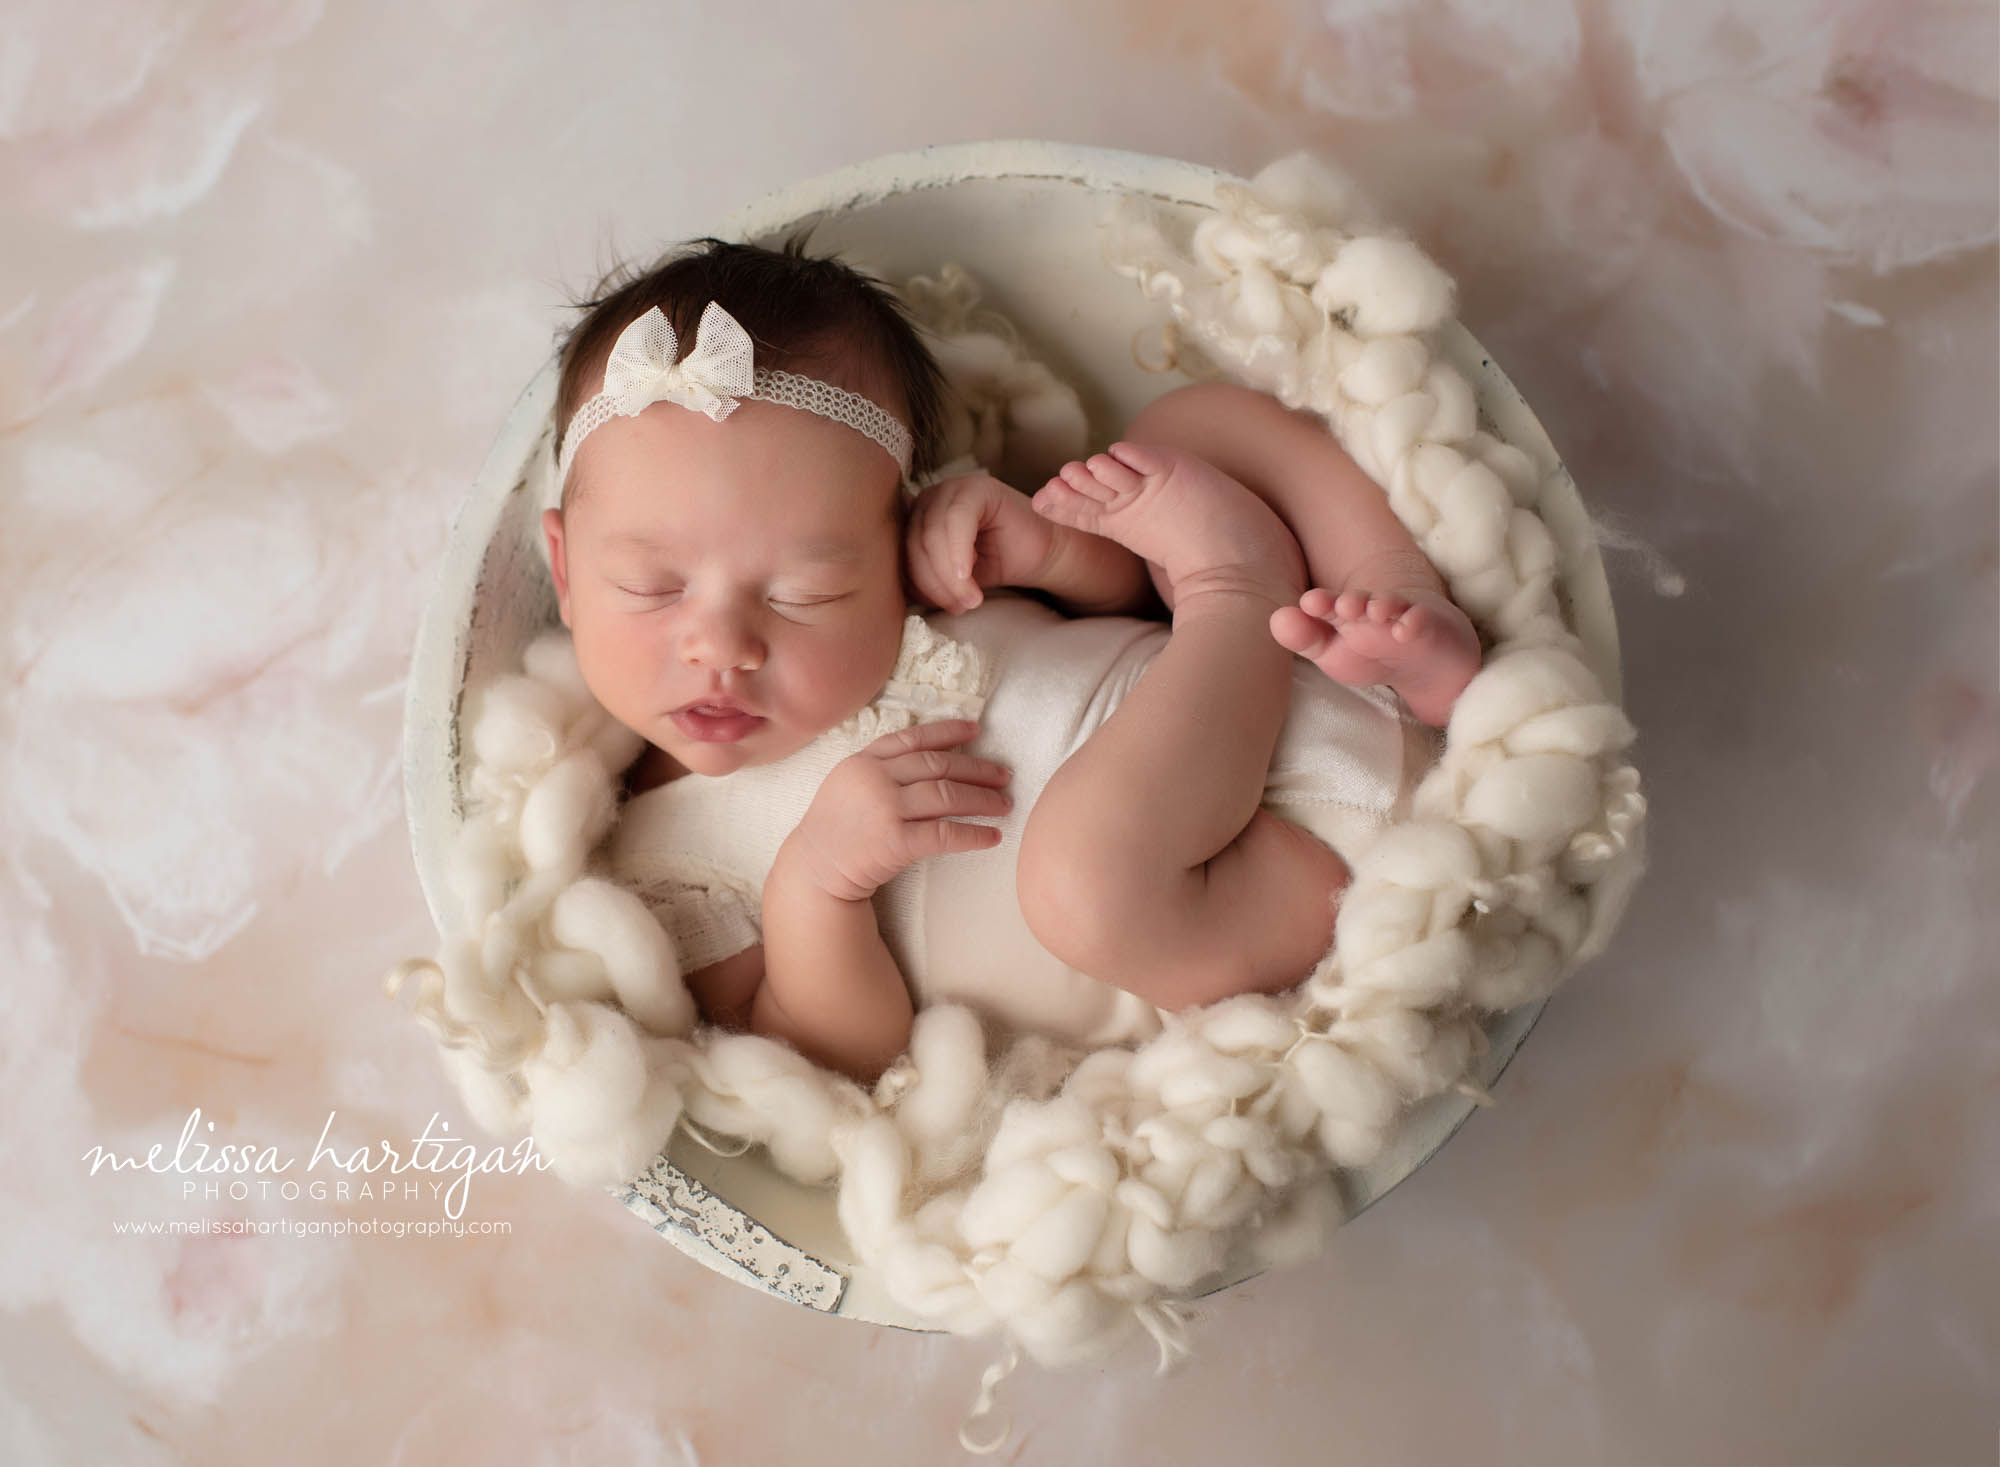 newborn baby girl waring cream outfit posed in wooden cream bowl with cream colored layer fluff